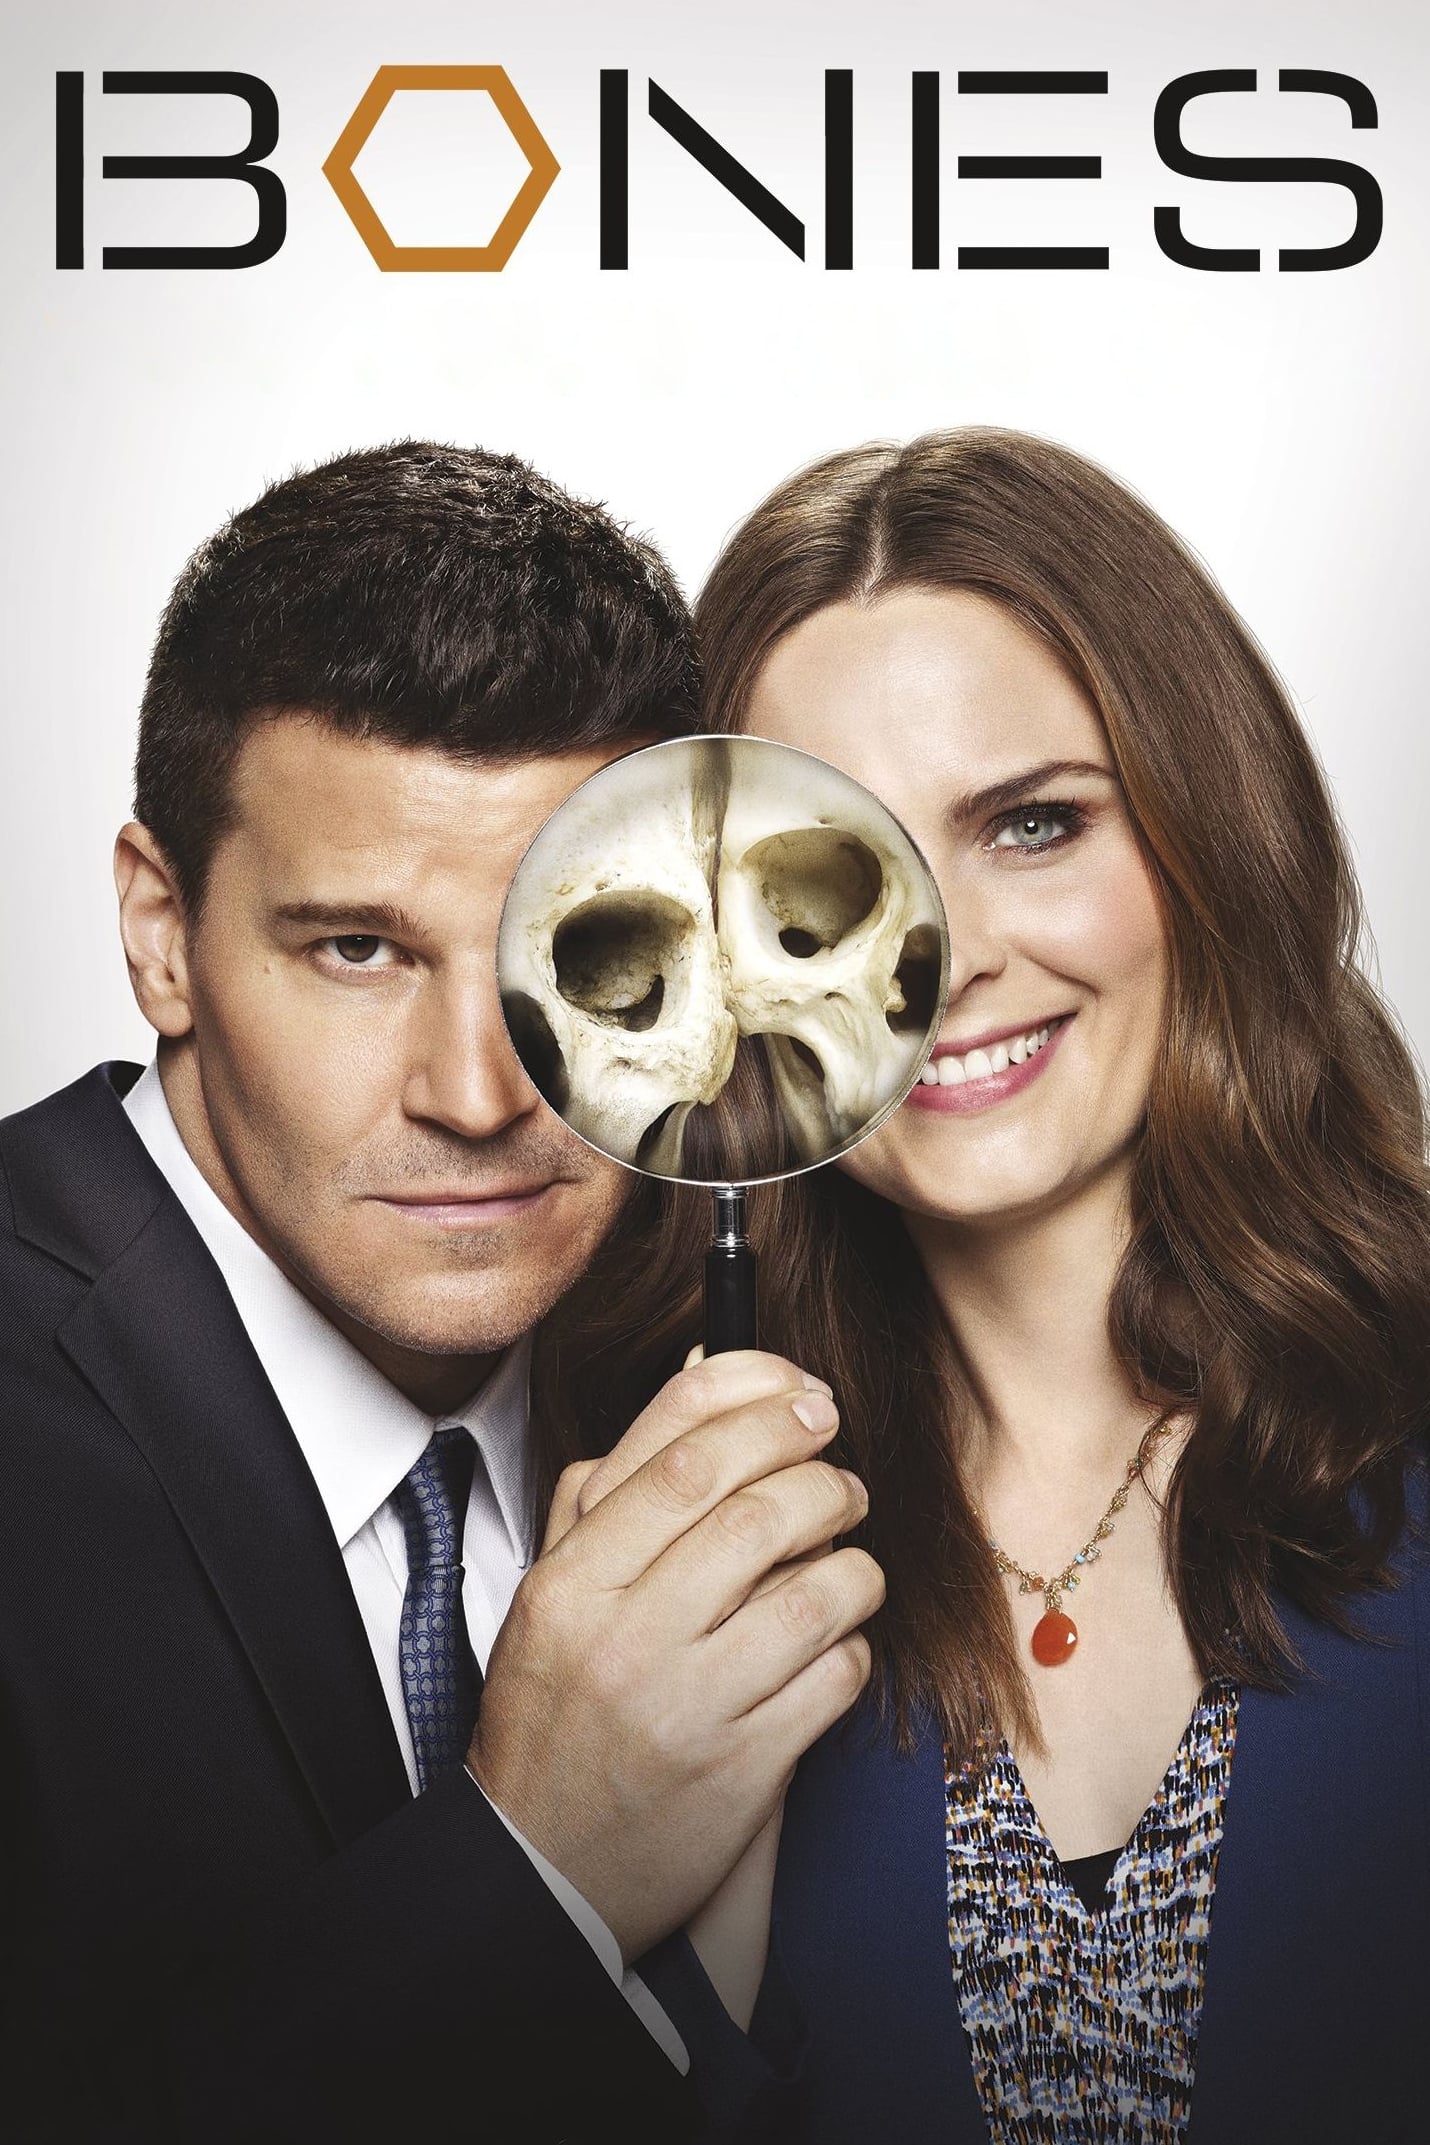 Bones TV Shows About Forensic Archaeology